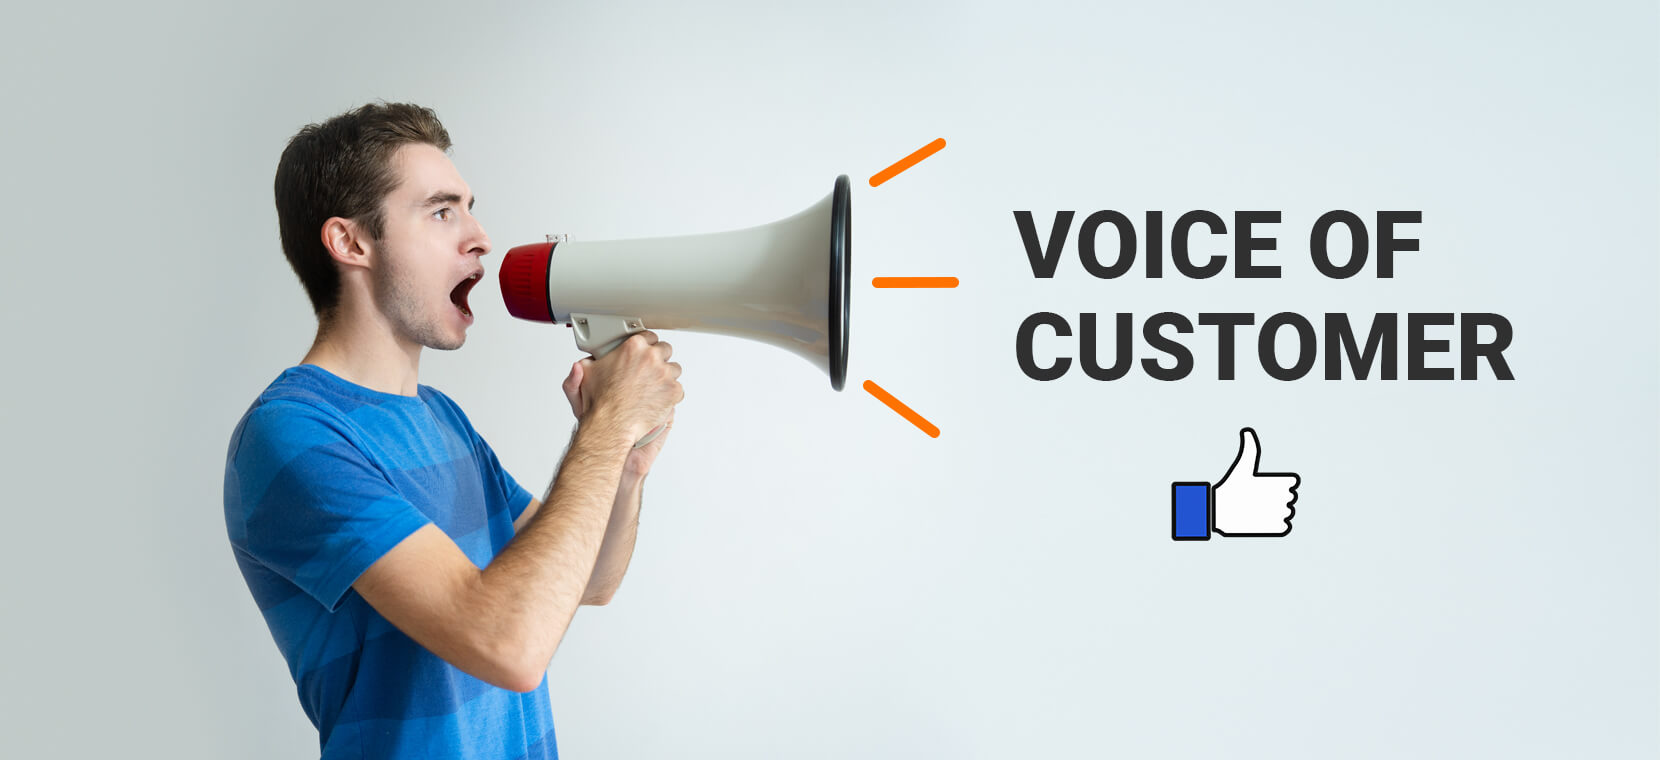 What is voice of customer?